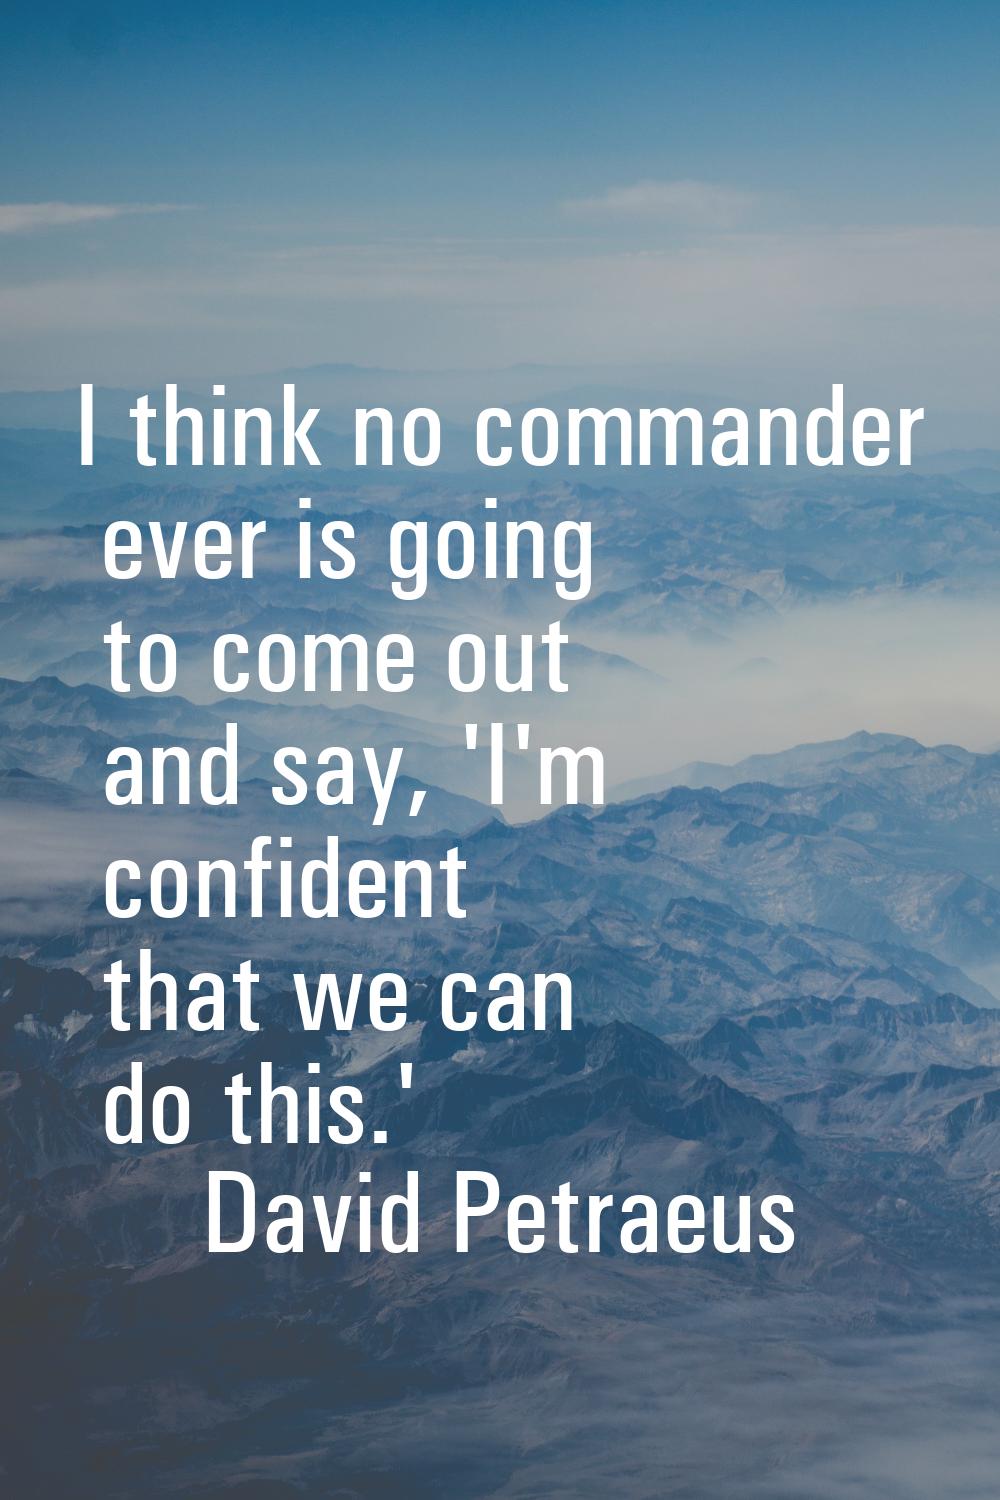 I think no commander ever is going to come out and say, 'I'm confident that we can do this.'